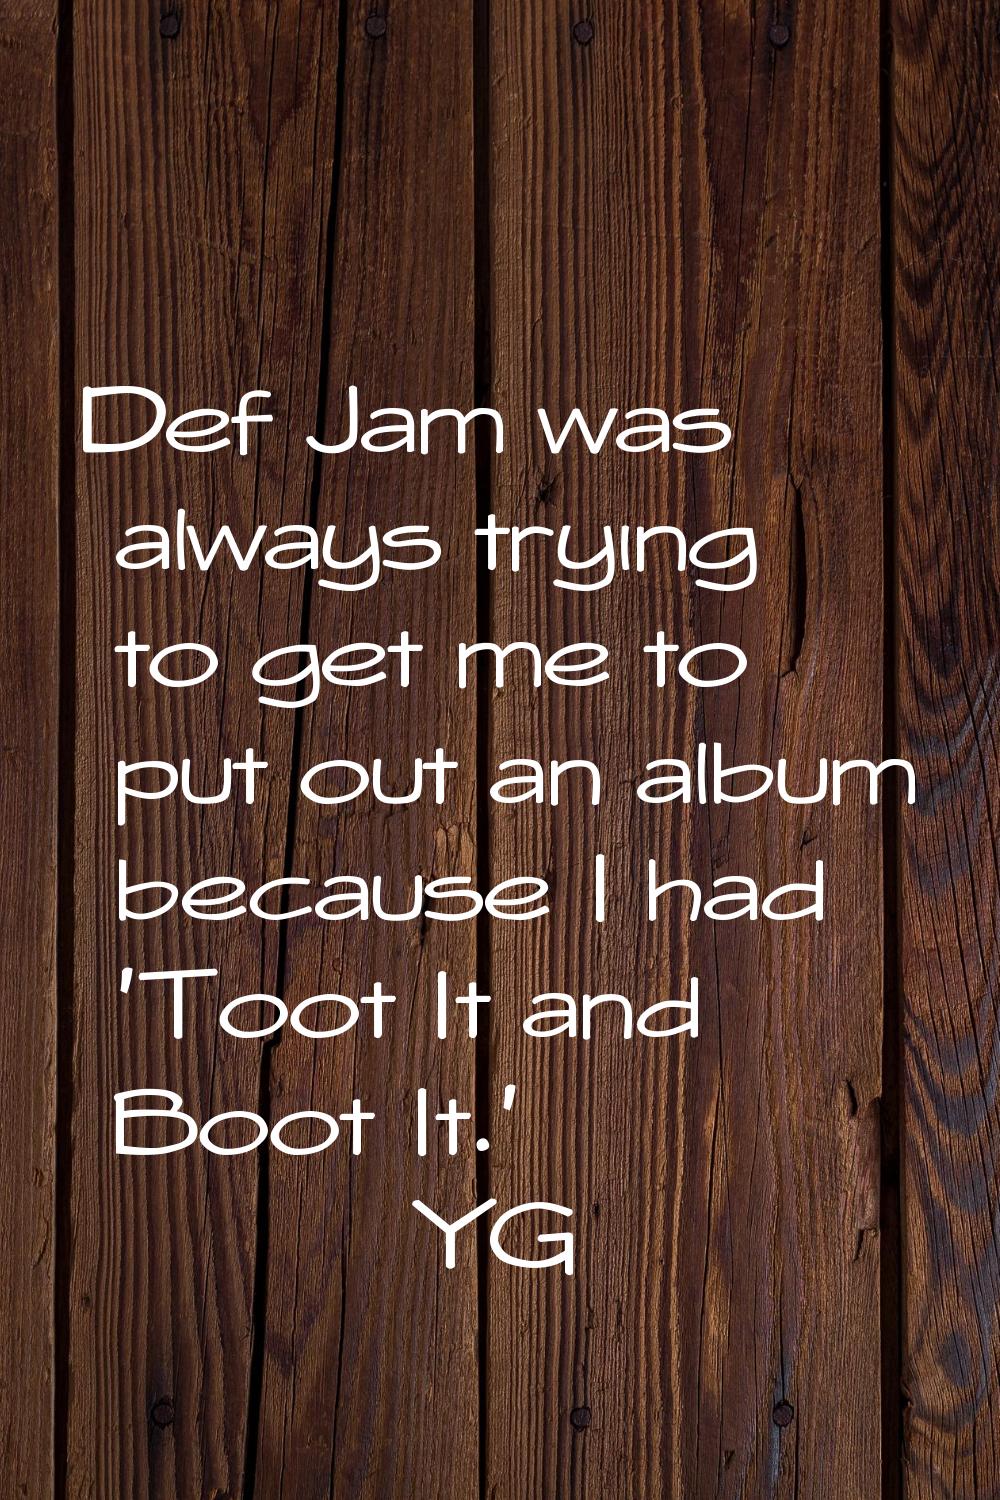 Def Jam was always trying to get me to put out an album because I had 'Toot It and Boot It.'